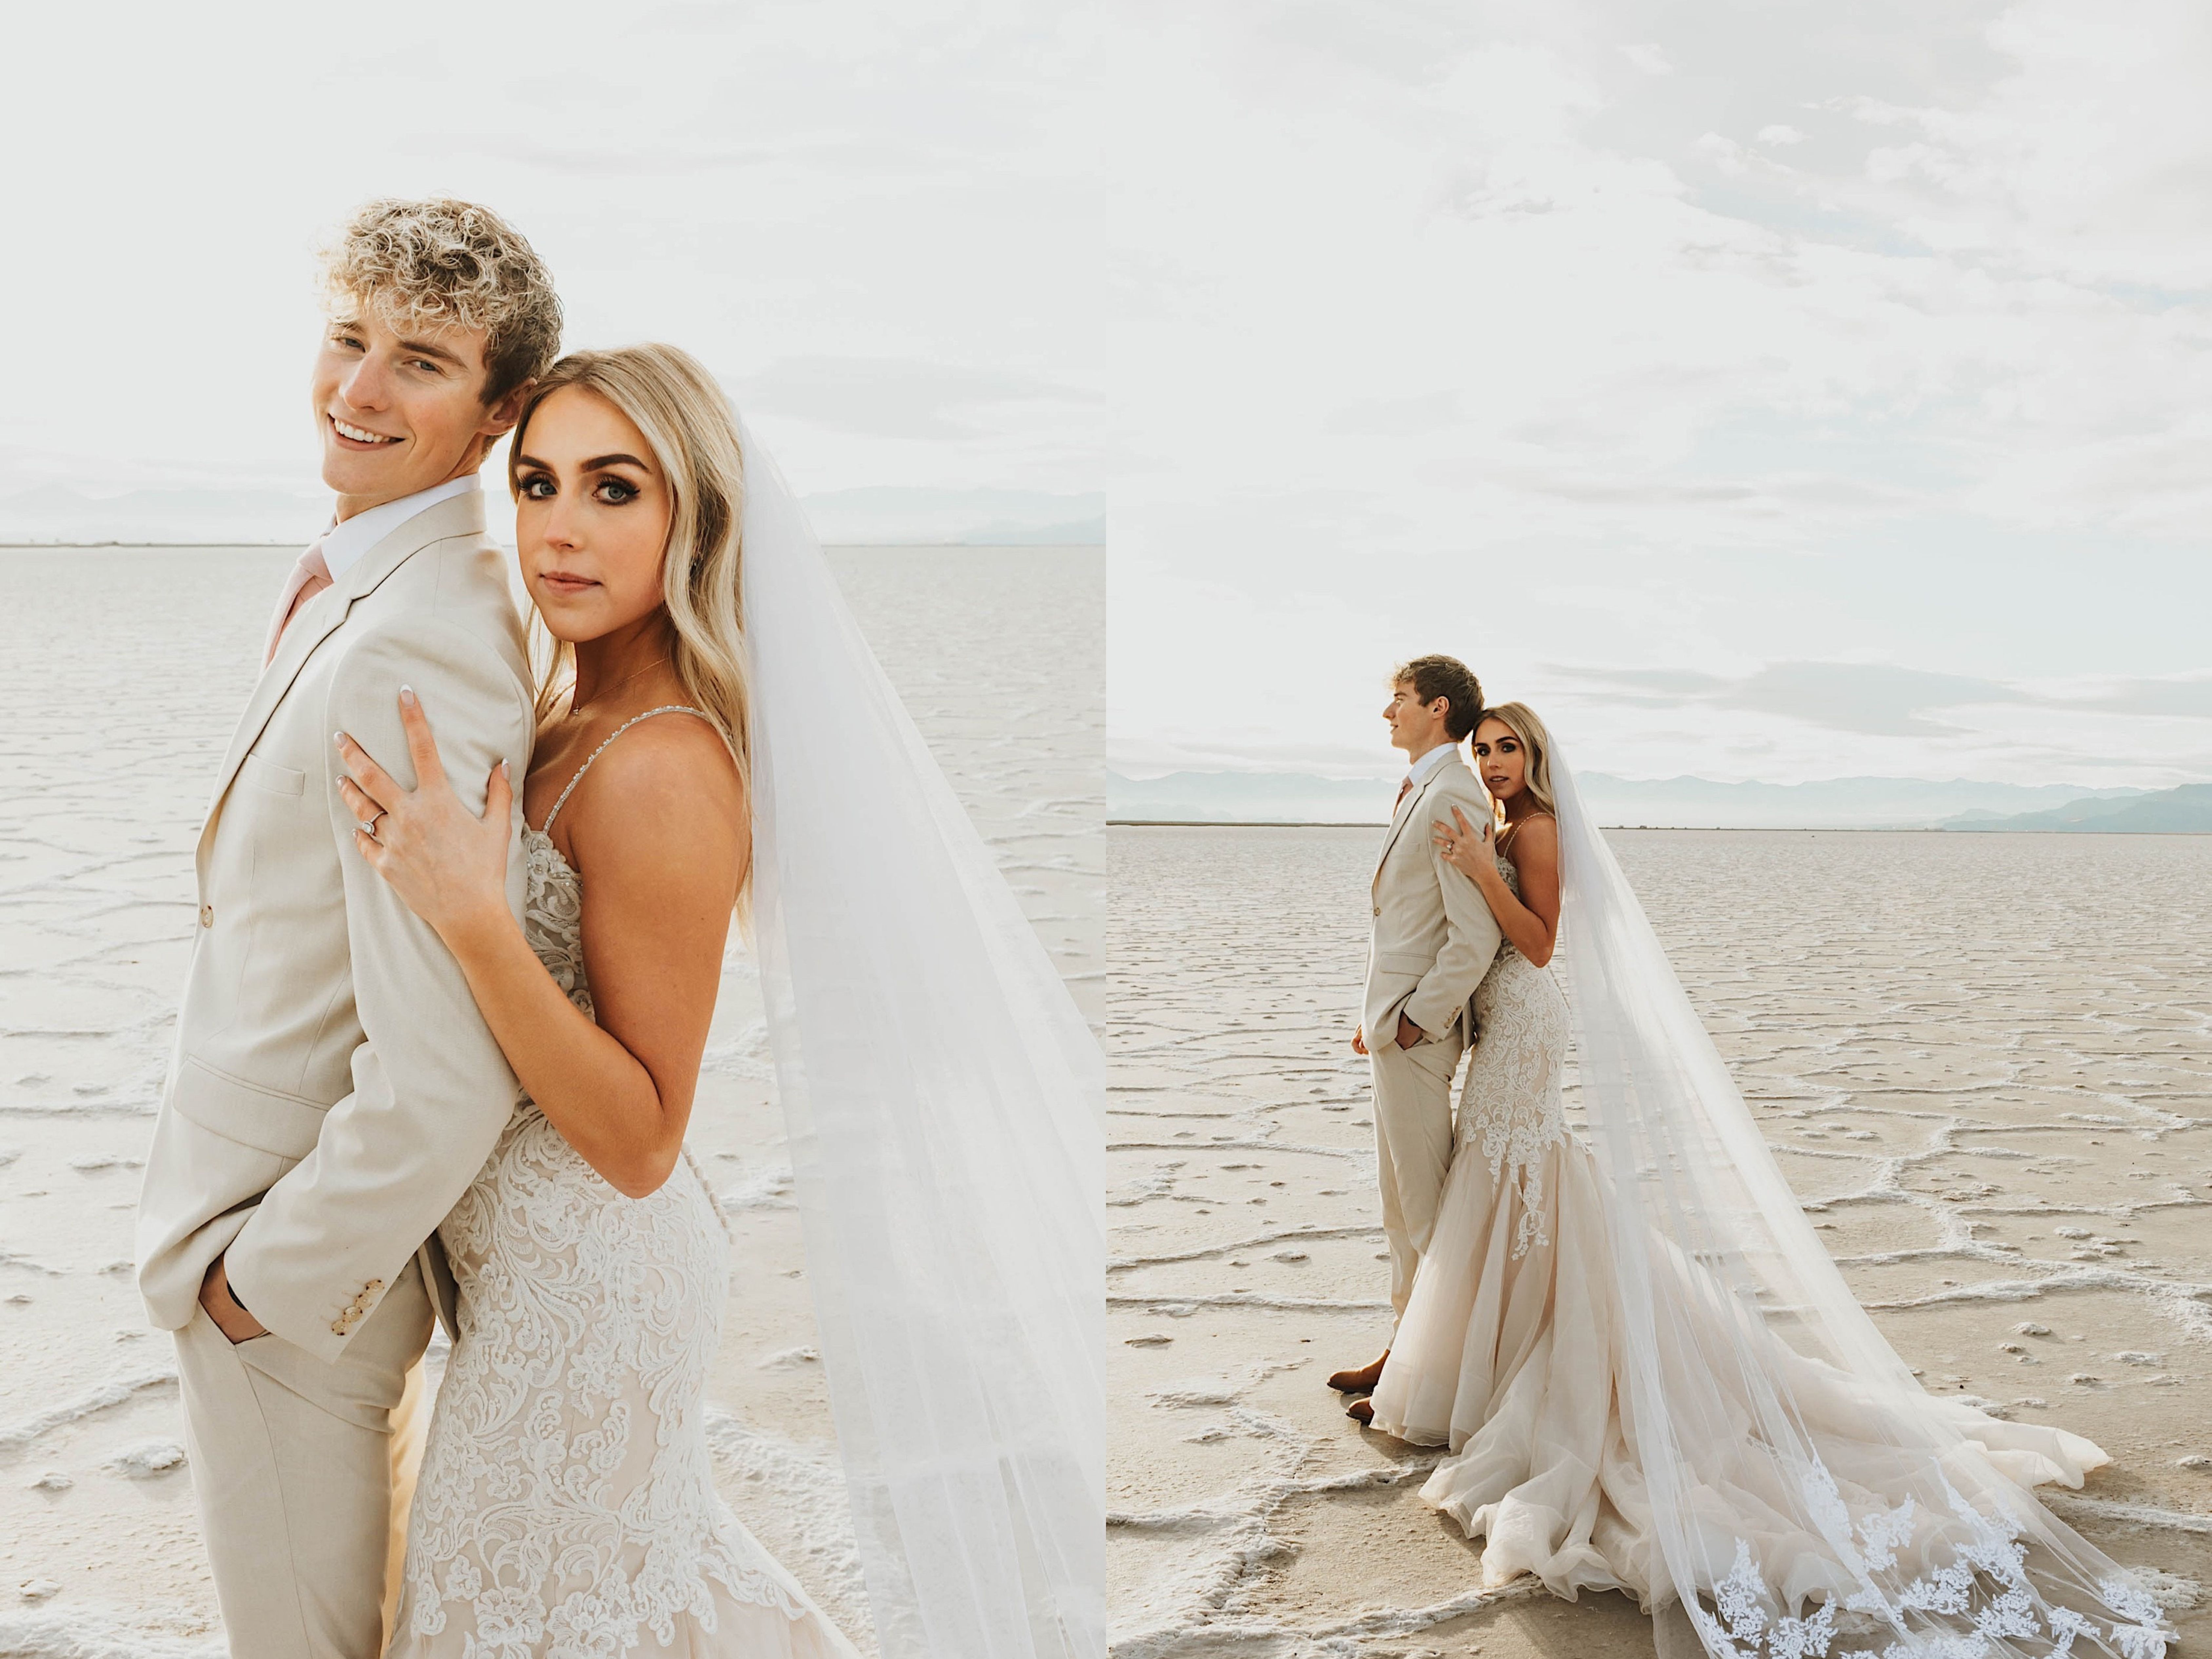 2 photos side by side, the left is of a bride and groom smiling at the camera, the bride is standing behind the groom, the right photo is the couple in the same position but from farther away showing off the Utah Salt Flats behind them